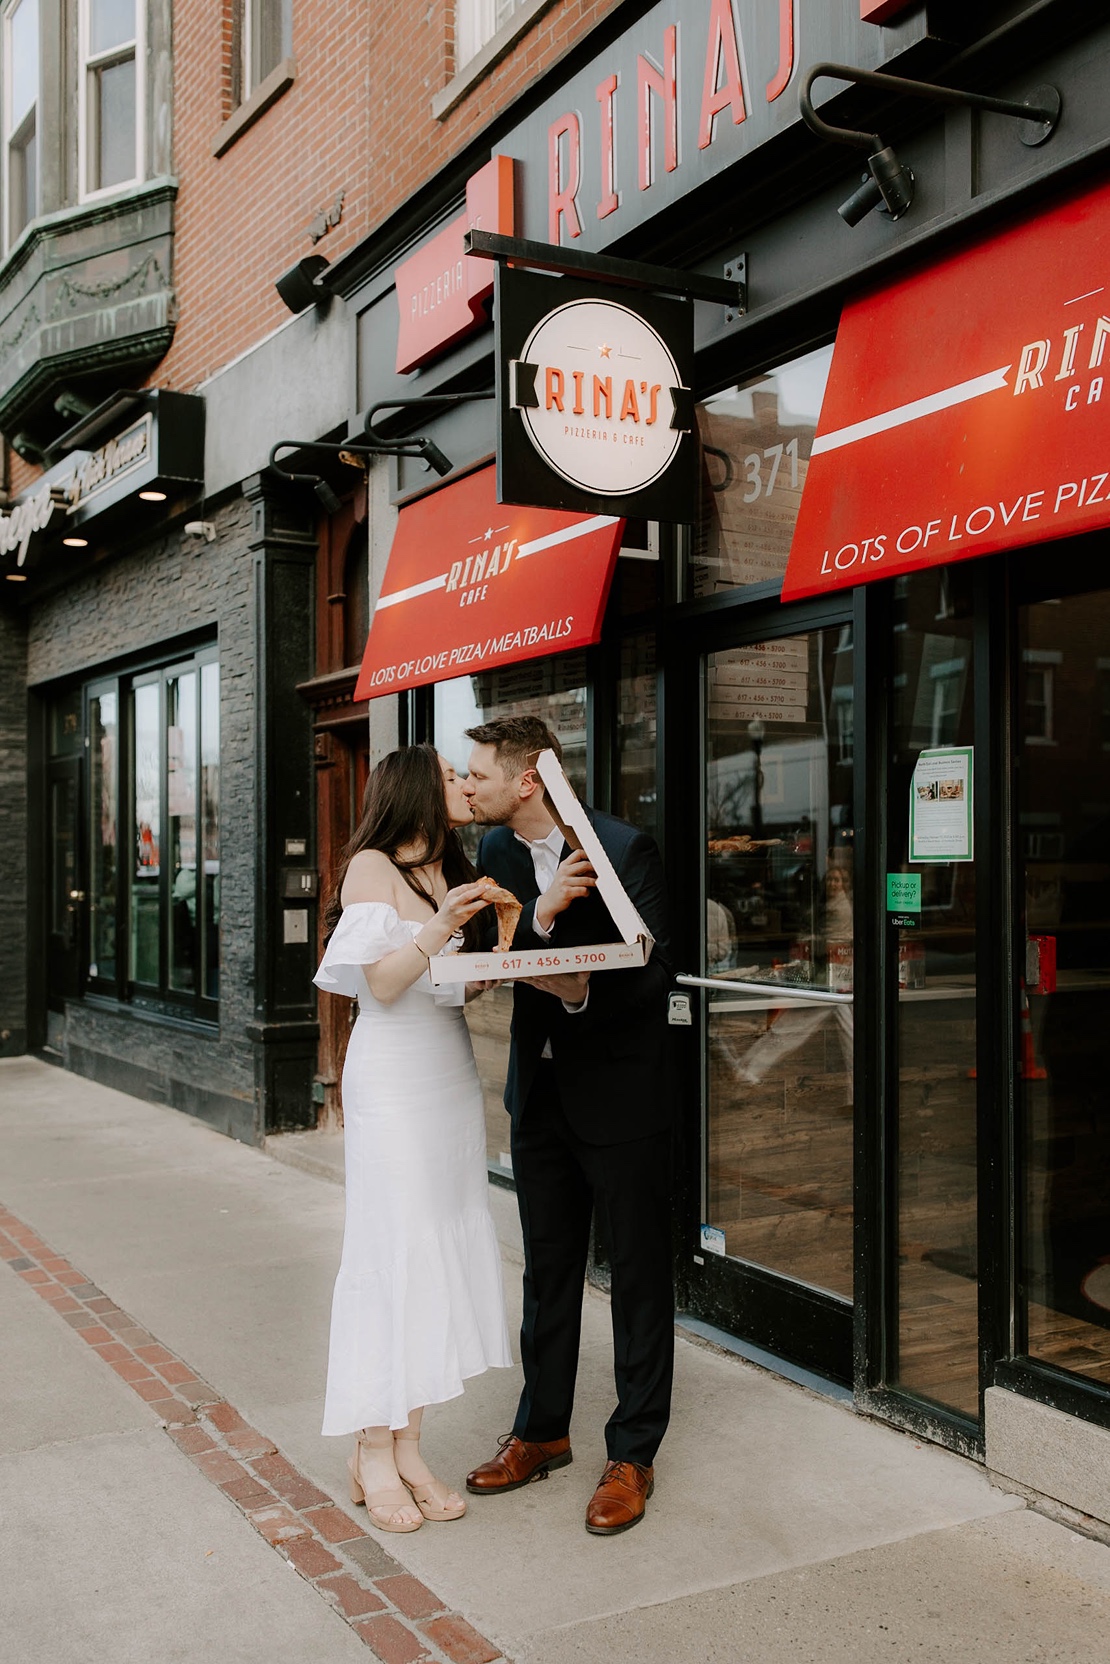 Man and woman kiss while holding pizza during North End engagement photos